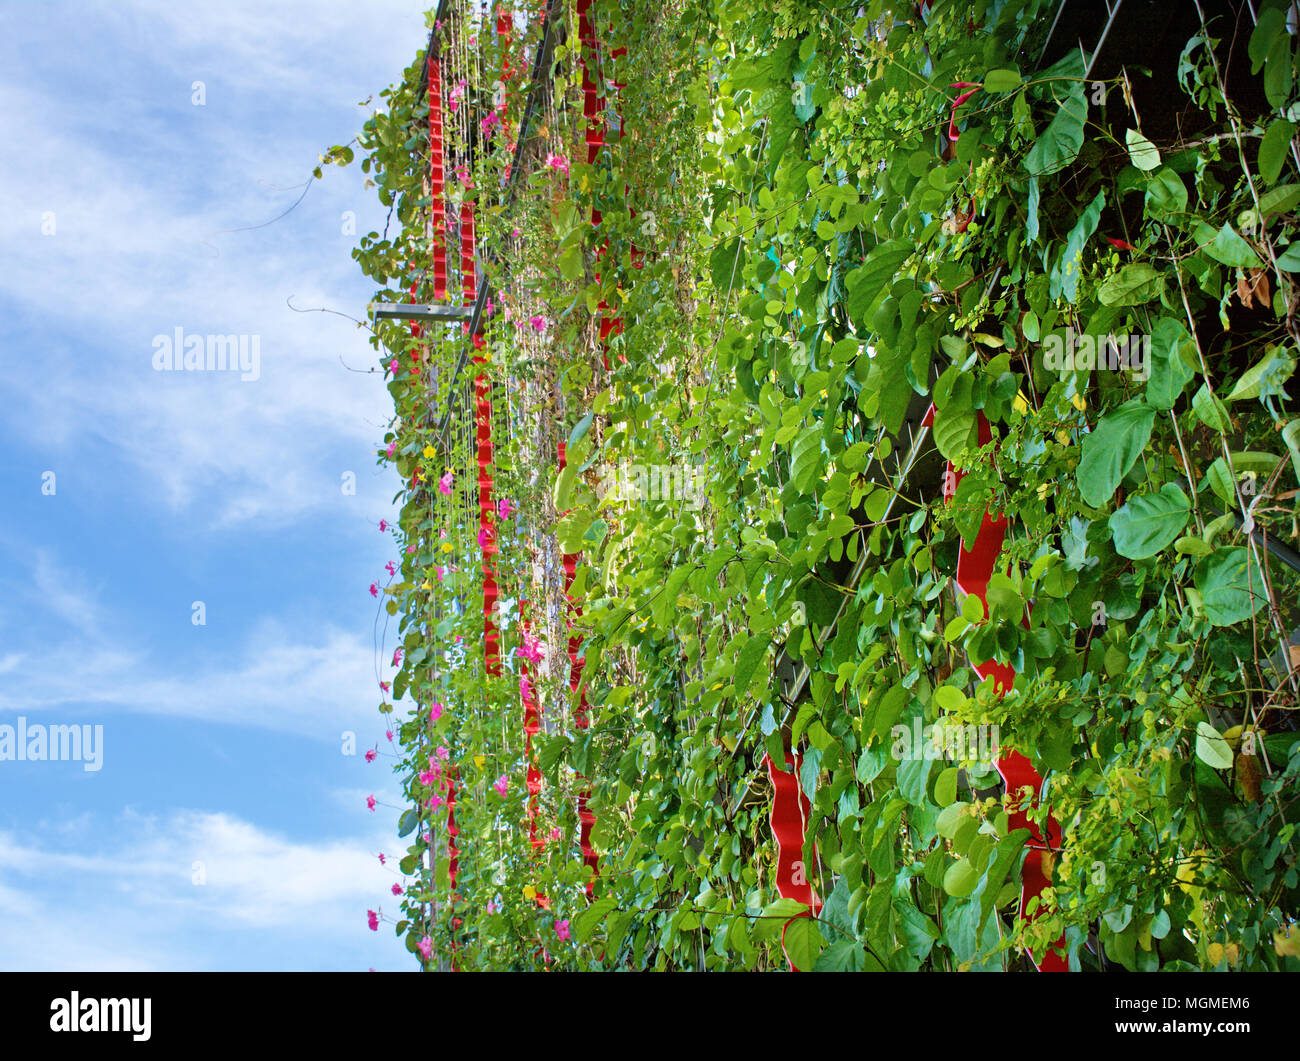 Stunning vertical garden with climbing vines on wires on the exterior of.a building structure Stock Photo